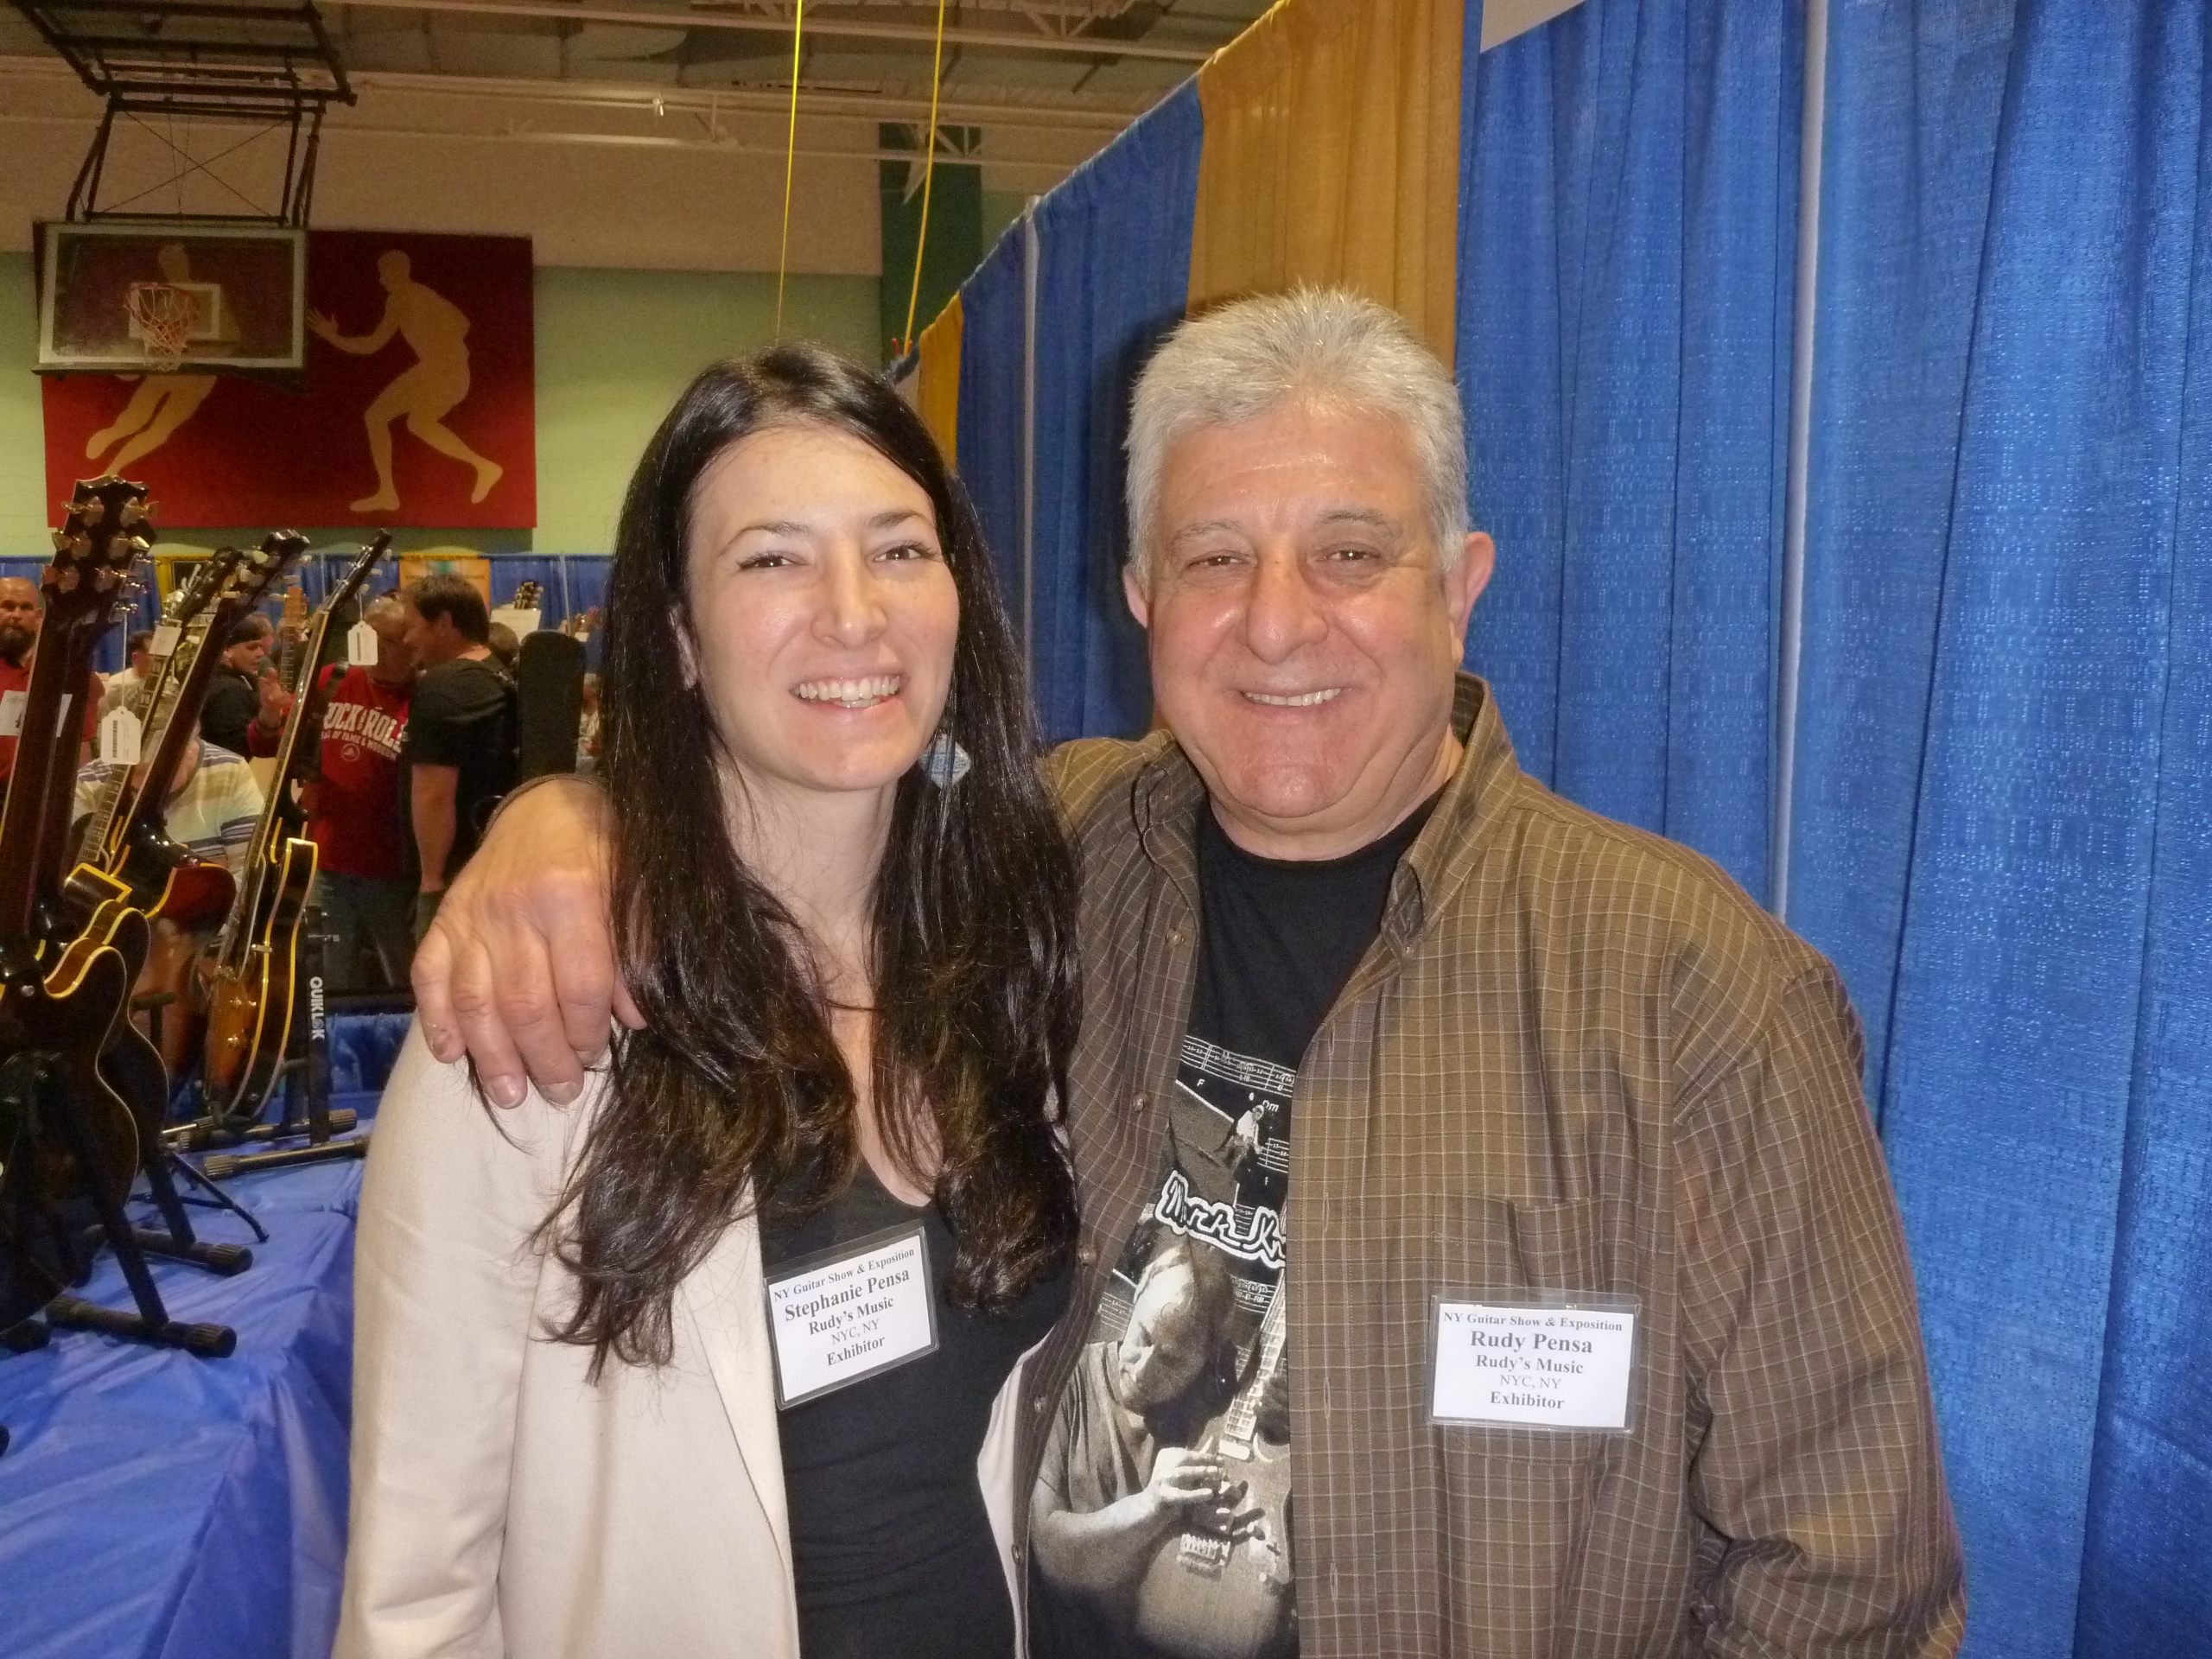 Stephanie Pensa and dad, Rudy, share a family moment in-between the chaos and crowds at the 4th NY Guitar Show.